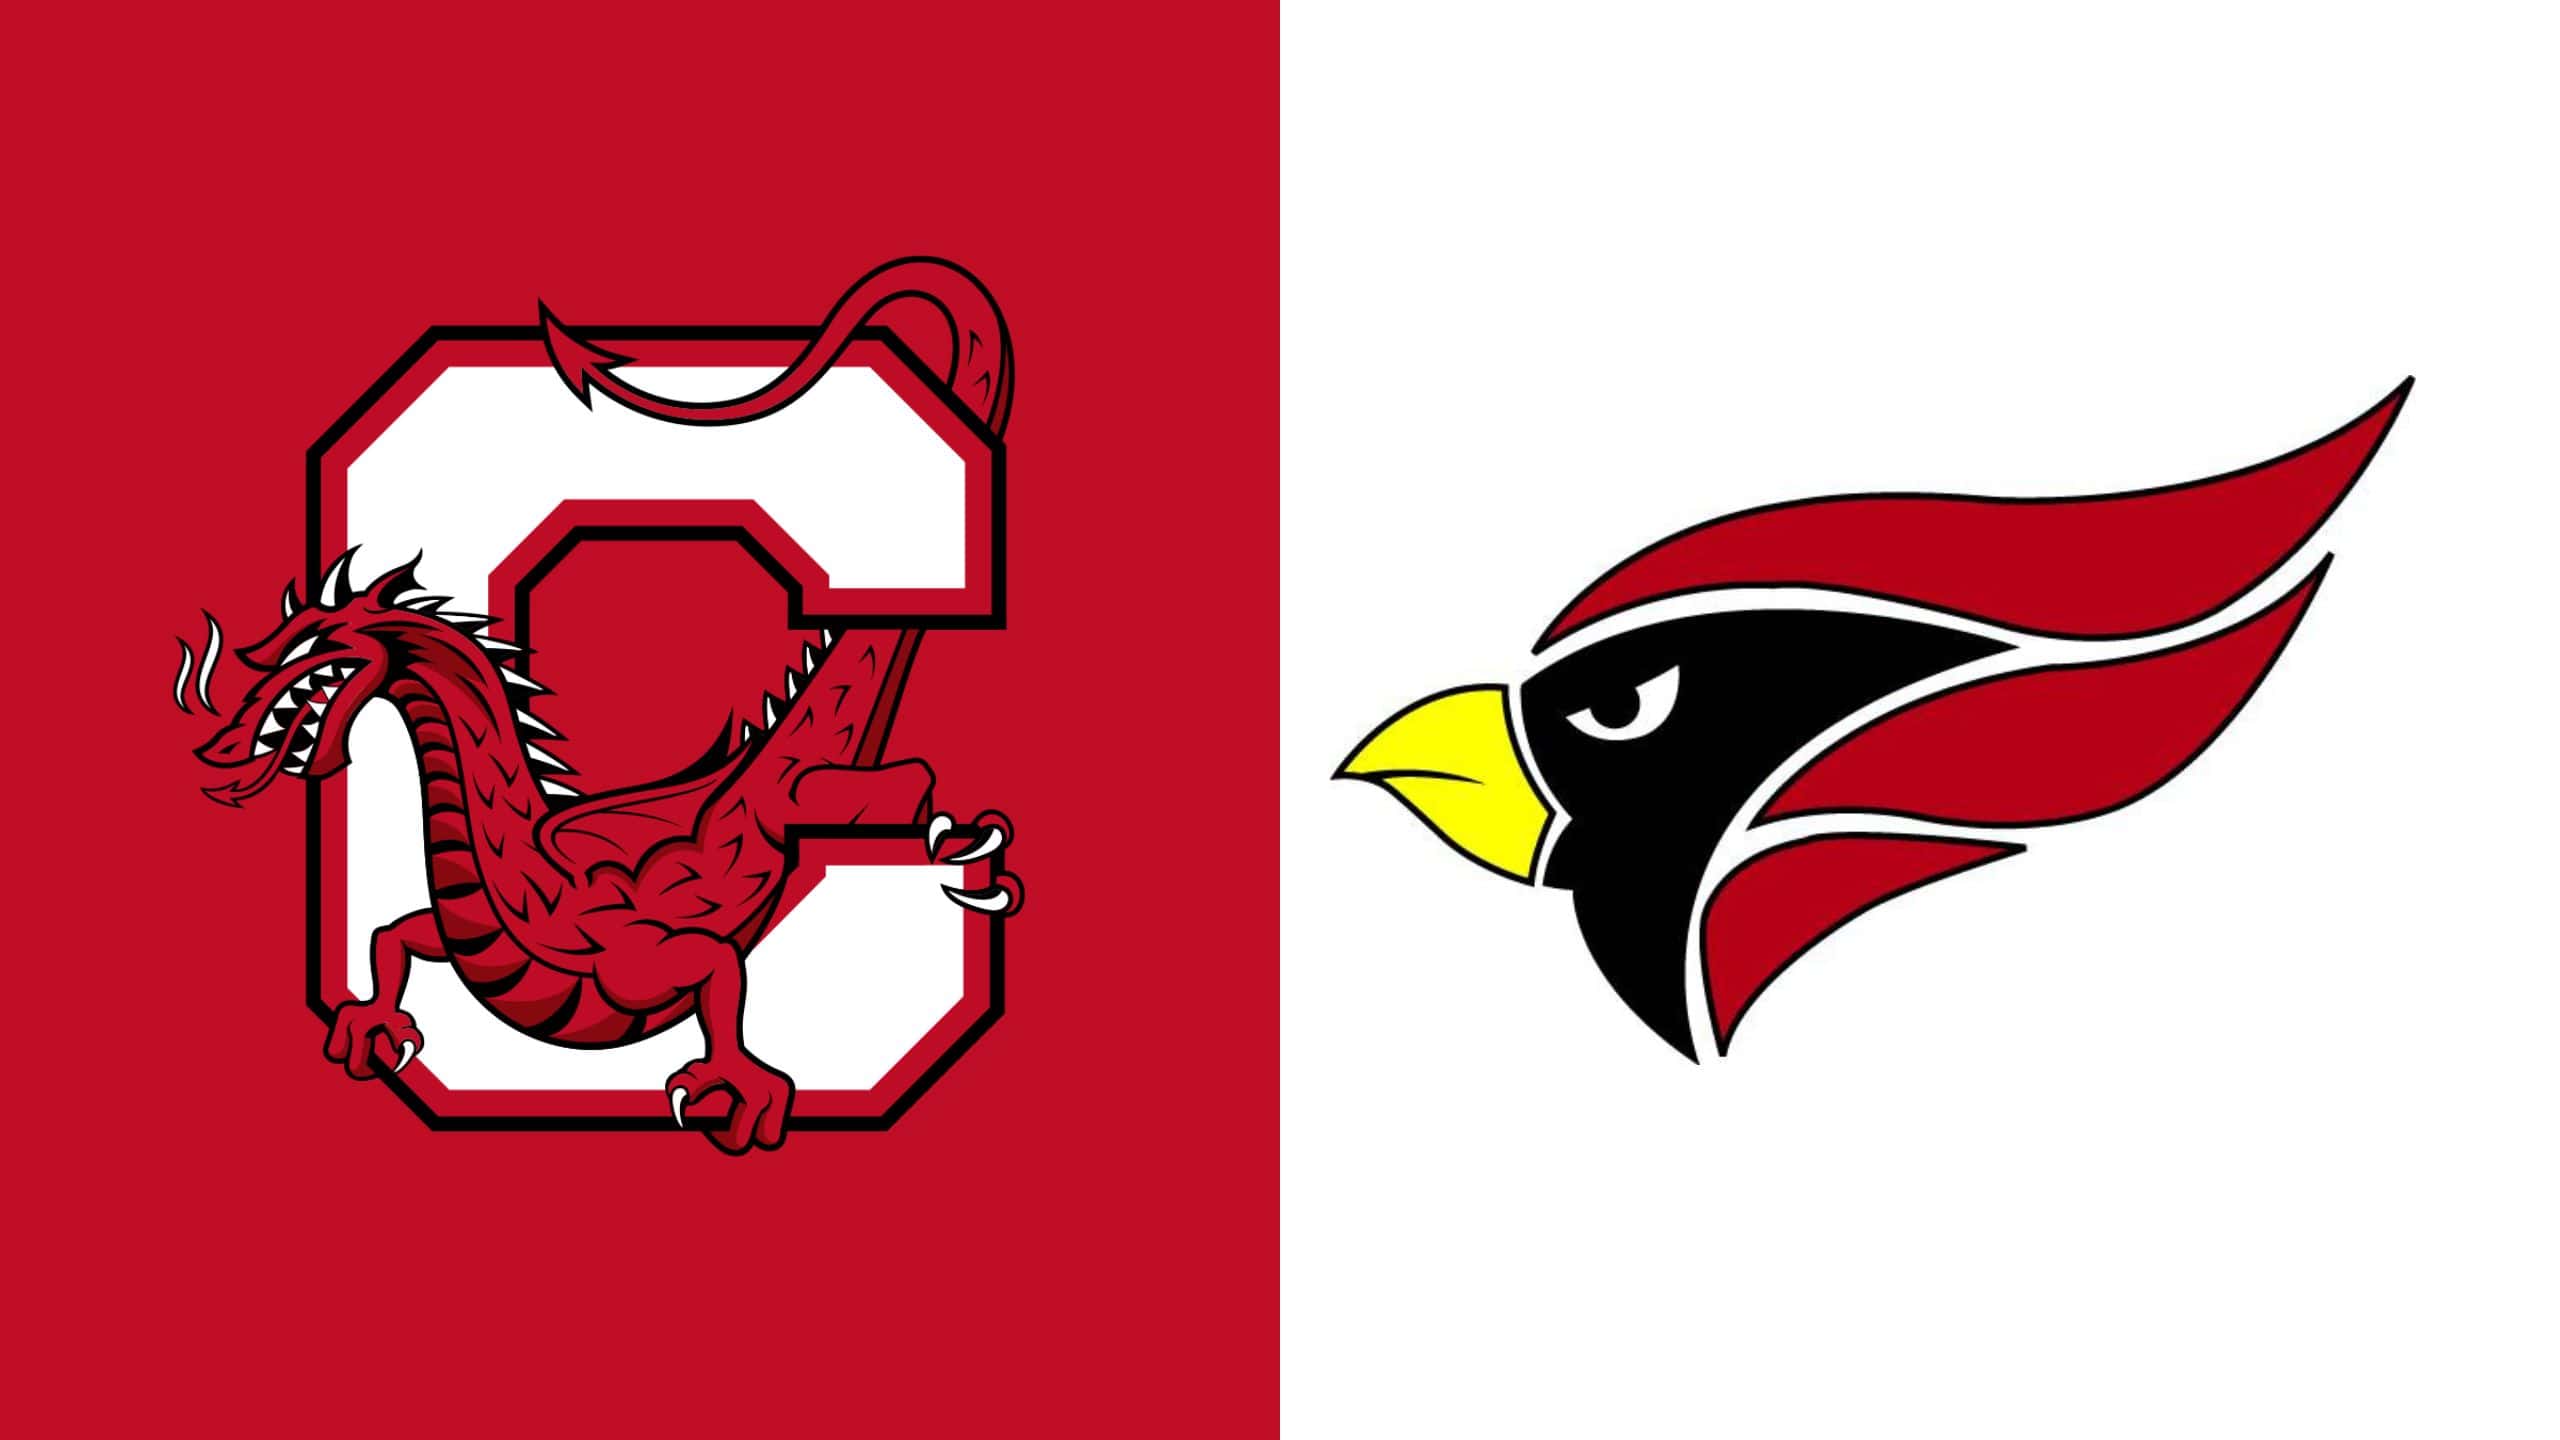 North Central Cardinals and SUNY Cortland Red Dragons